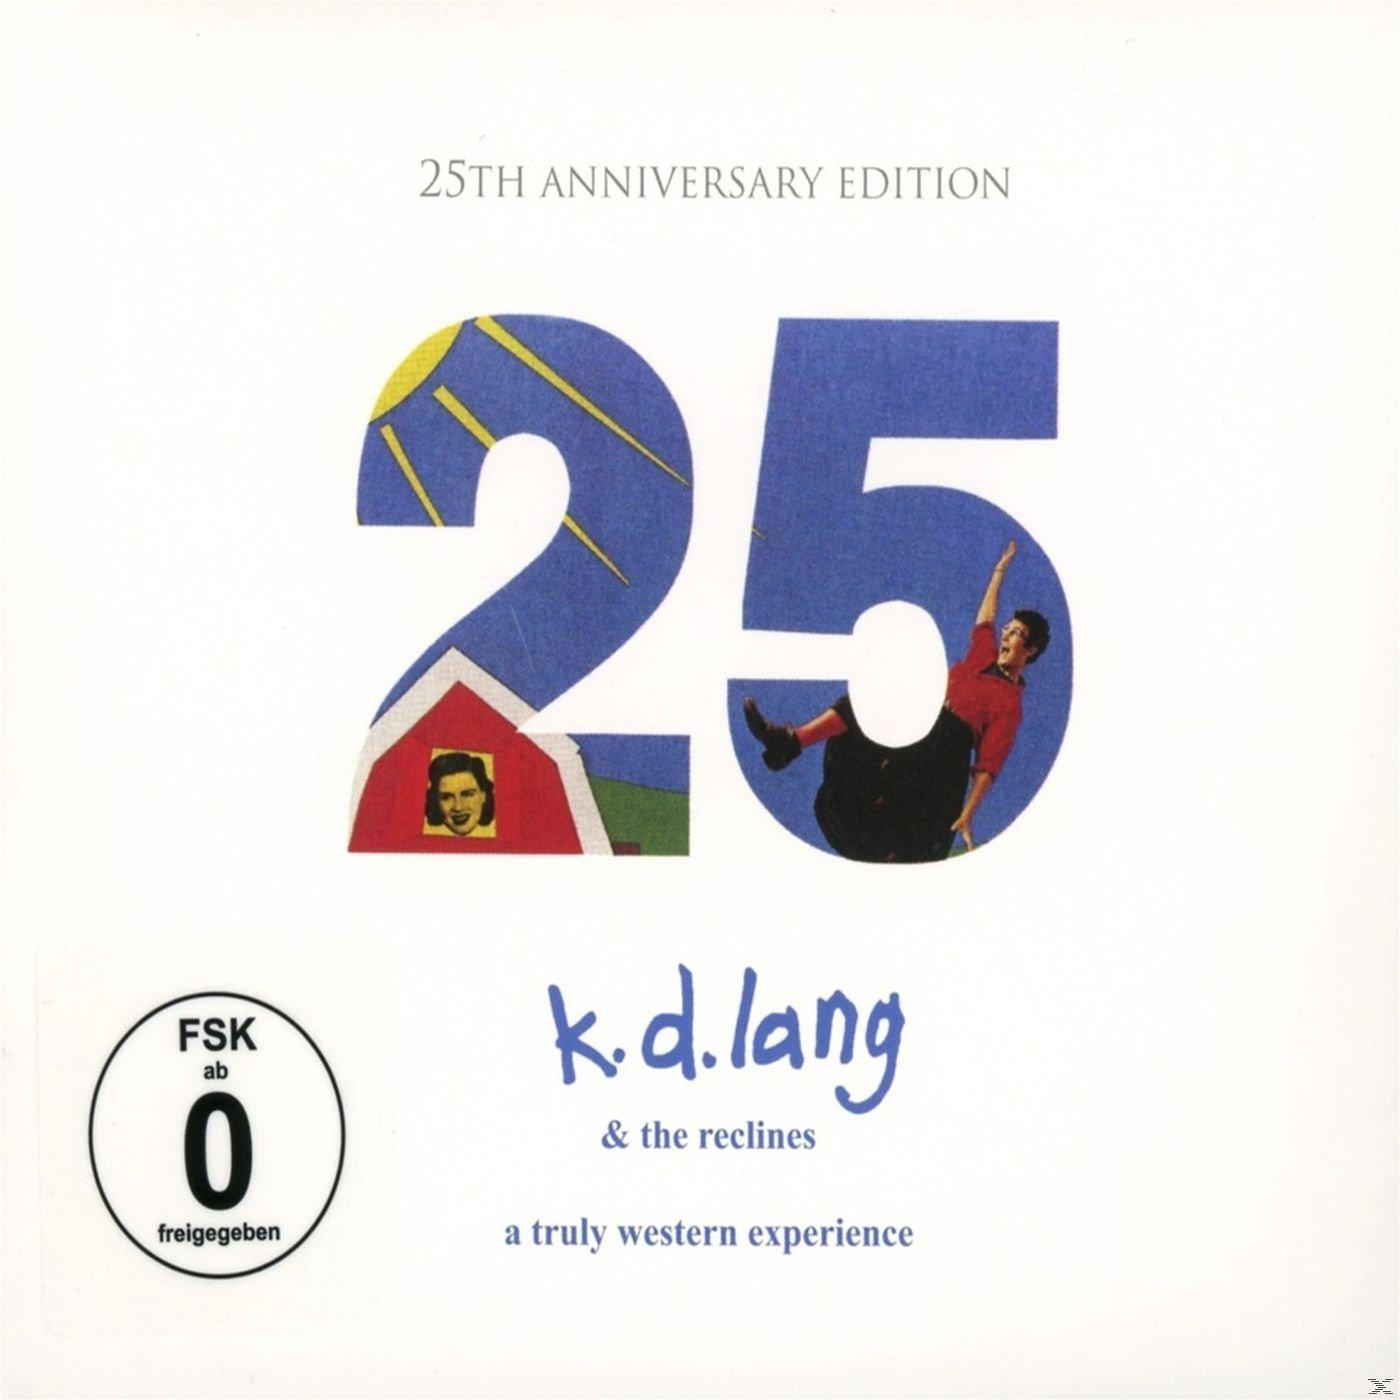 K.D. & The DVD Western A Video) Truly Reclines (CD + Lang Experience - 